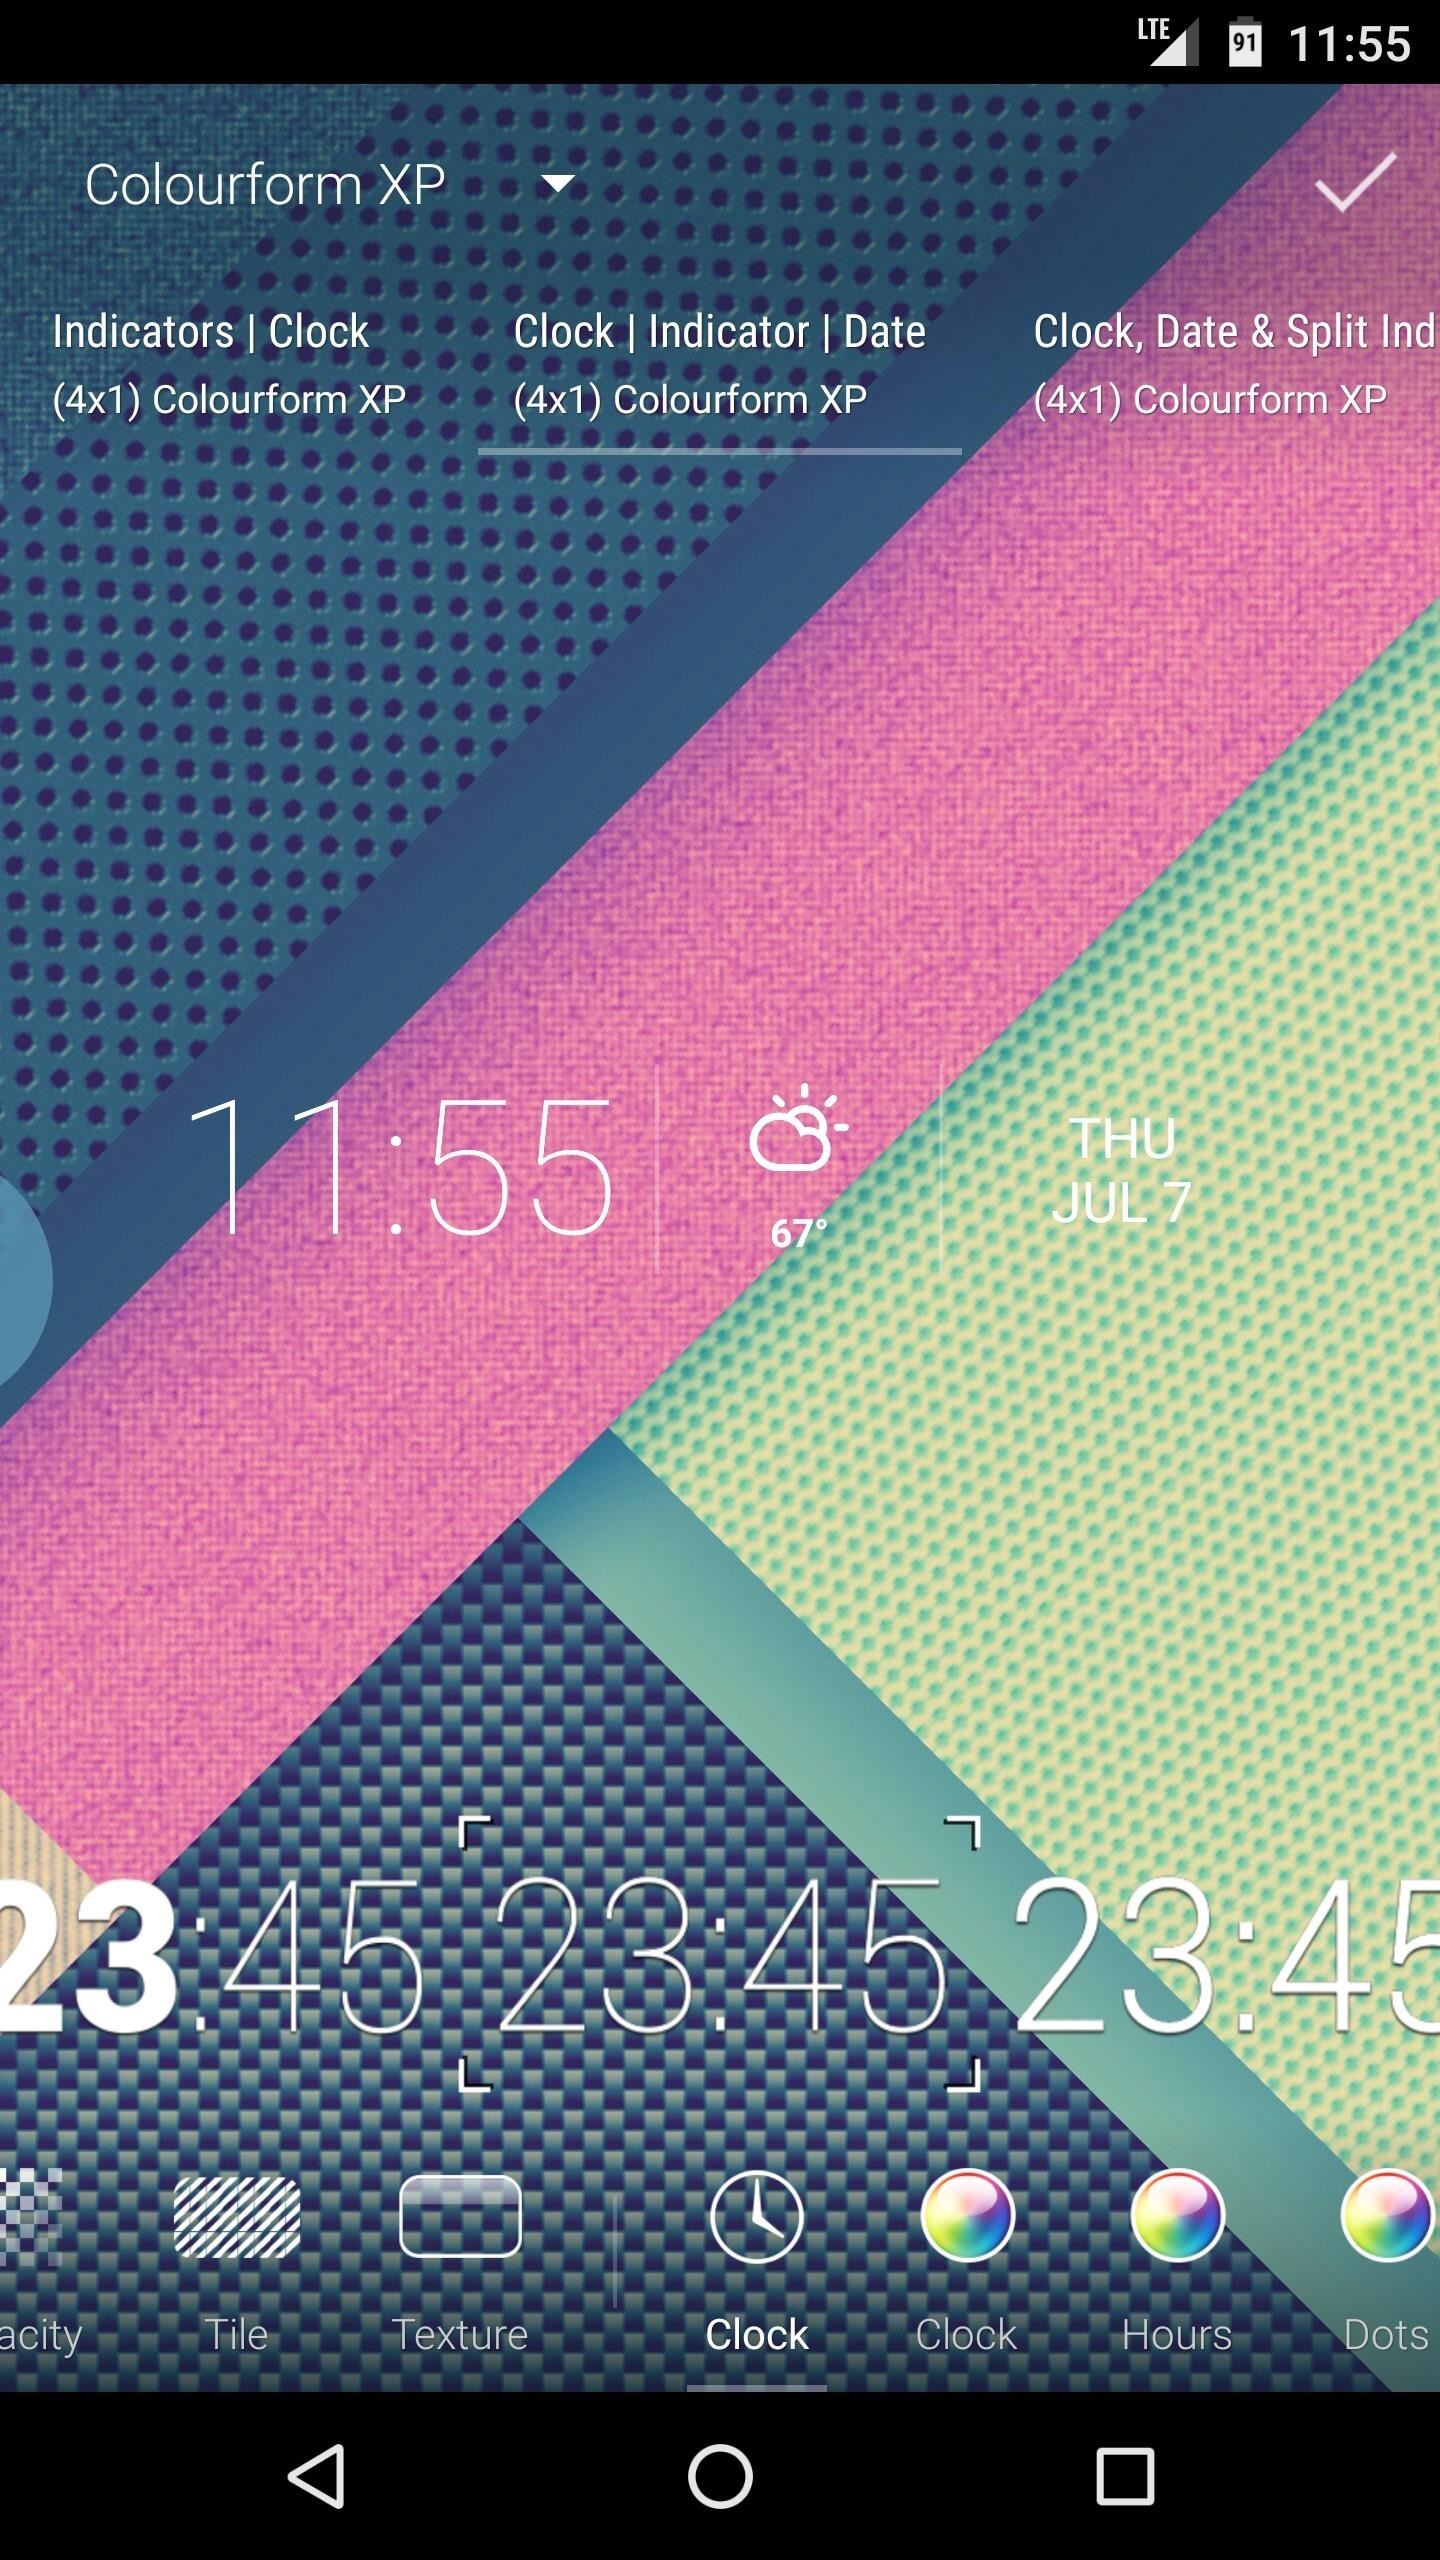 Add a Special Swipe to Access Your Favorite Android Widgets from Anywhere